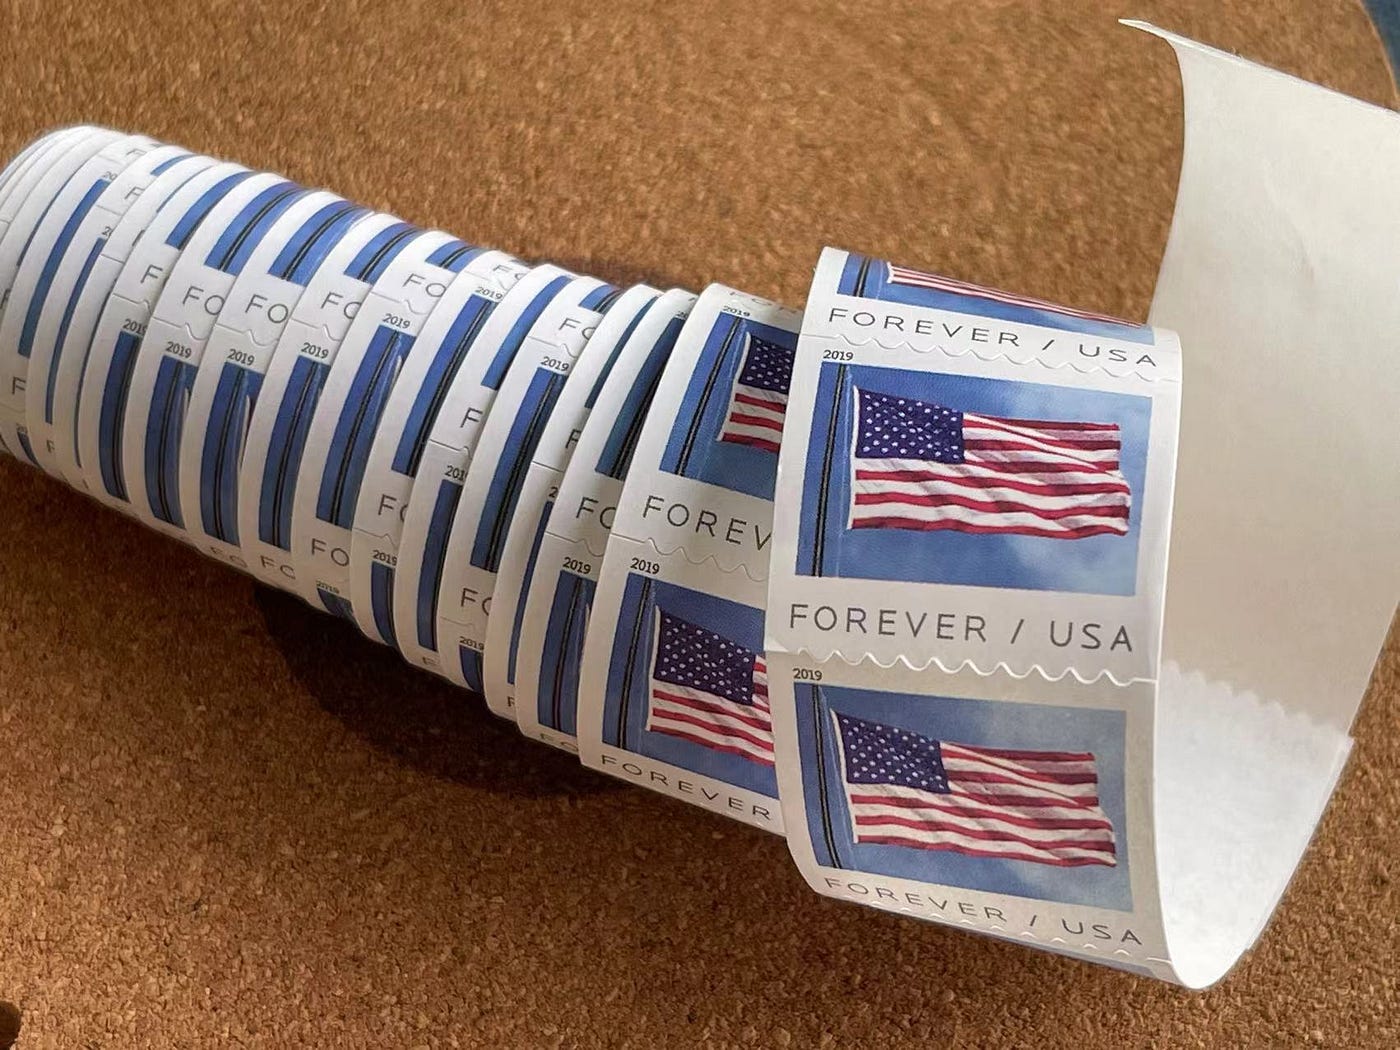 Forever Stamps for Sale: Why You Should Buy Them Now? 🇺🇸